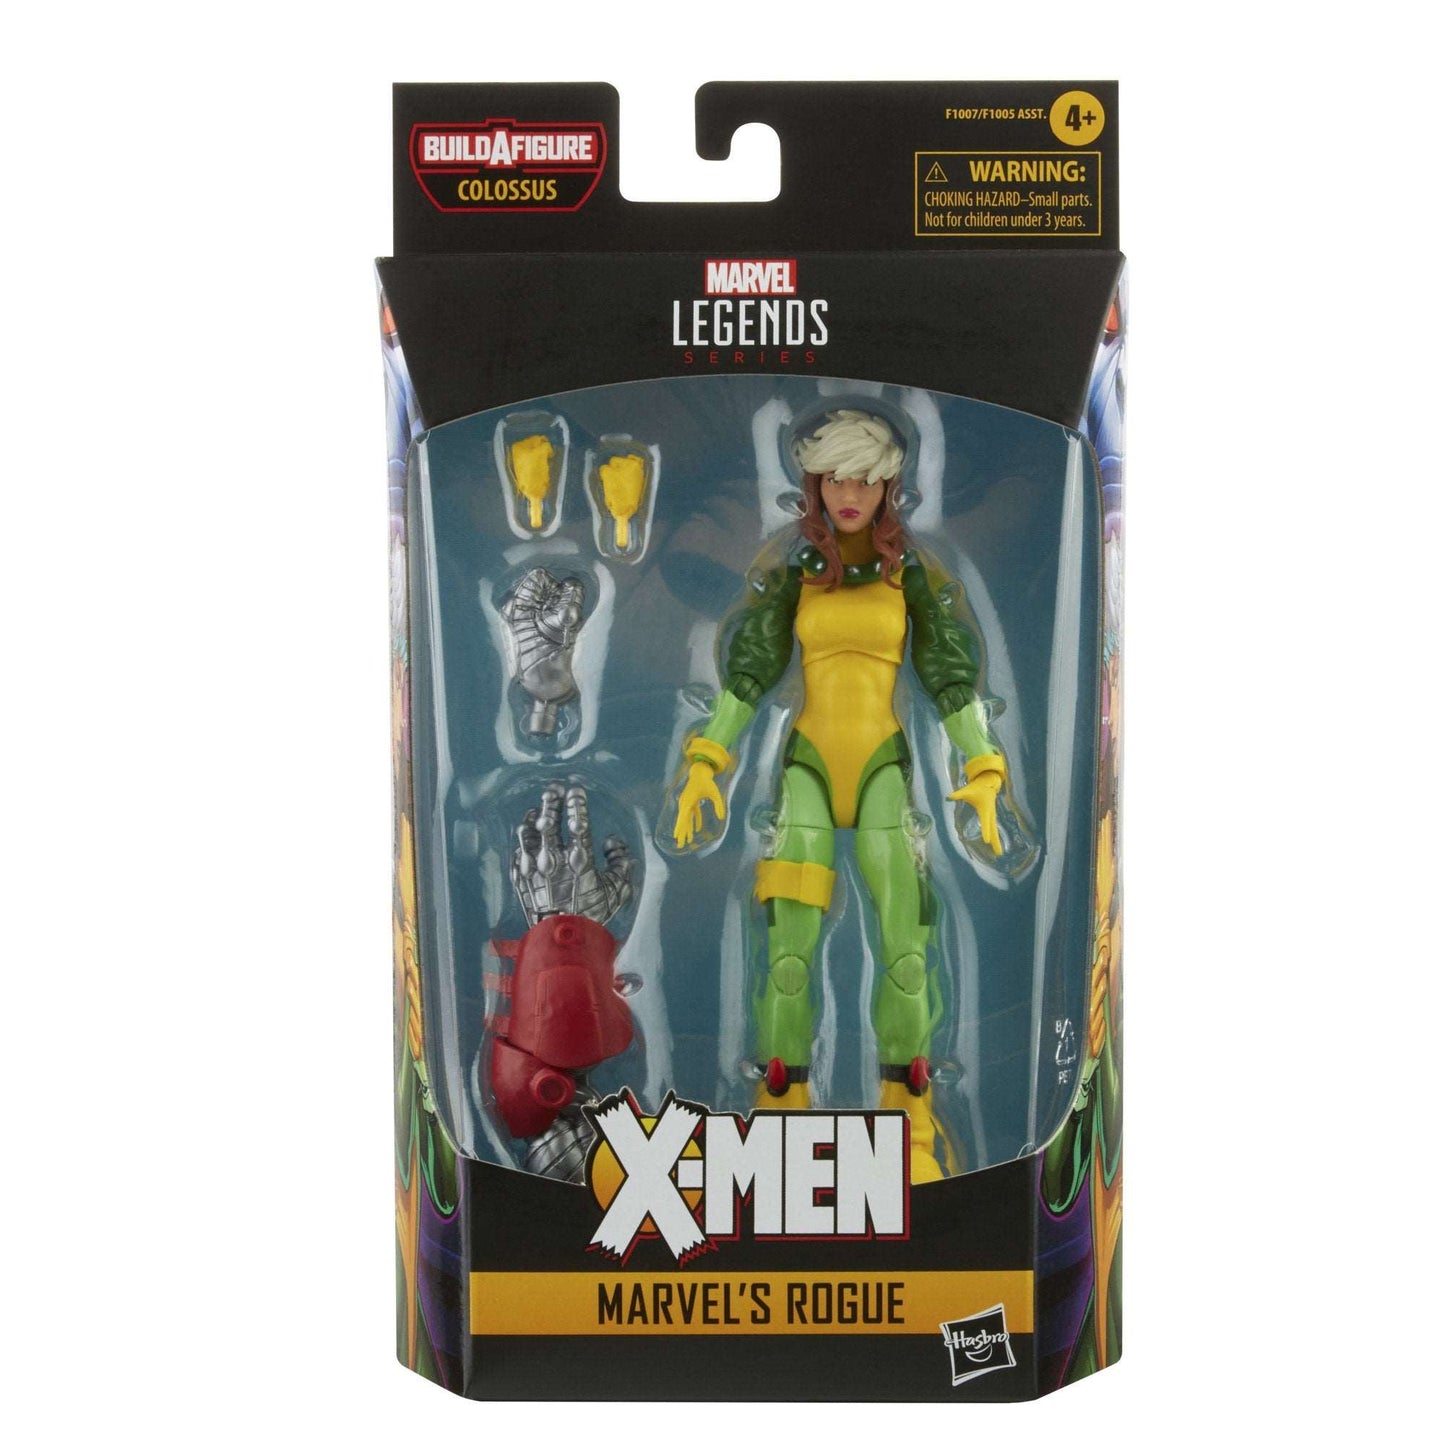 Hasbro Marvel Legends Series X-men Age of Apocalypse Rogue figure in packaging front of box